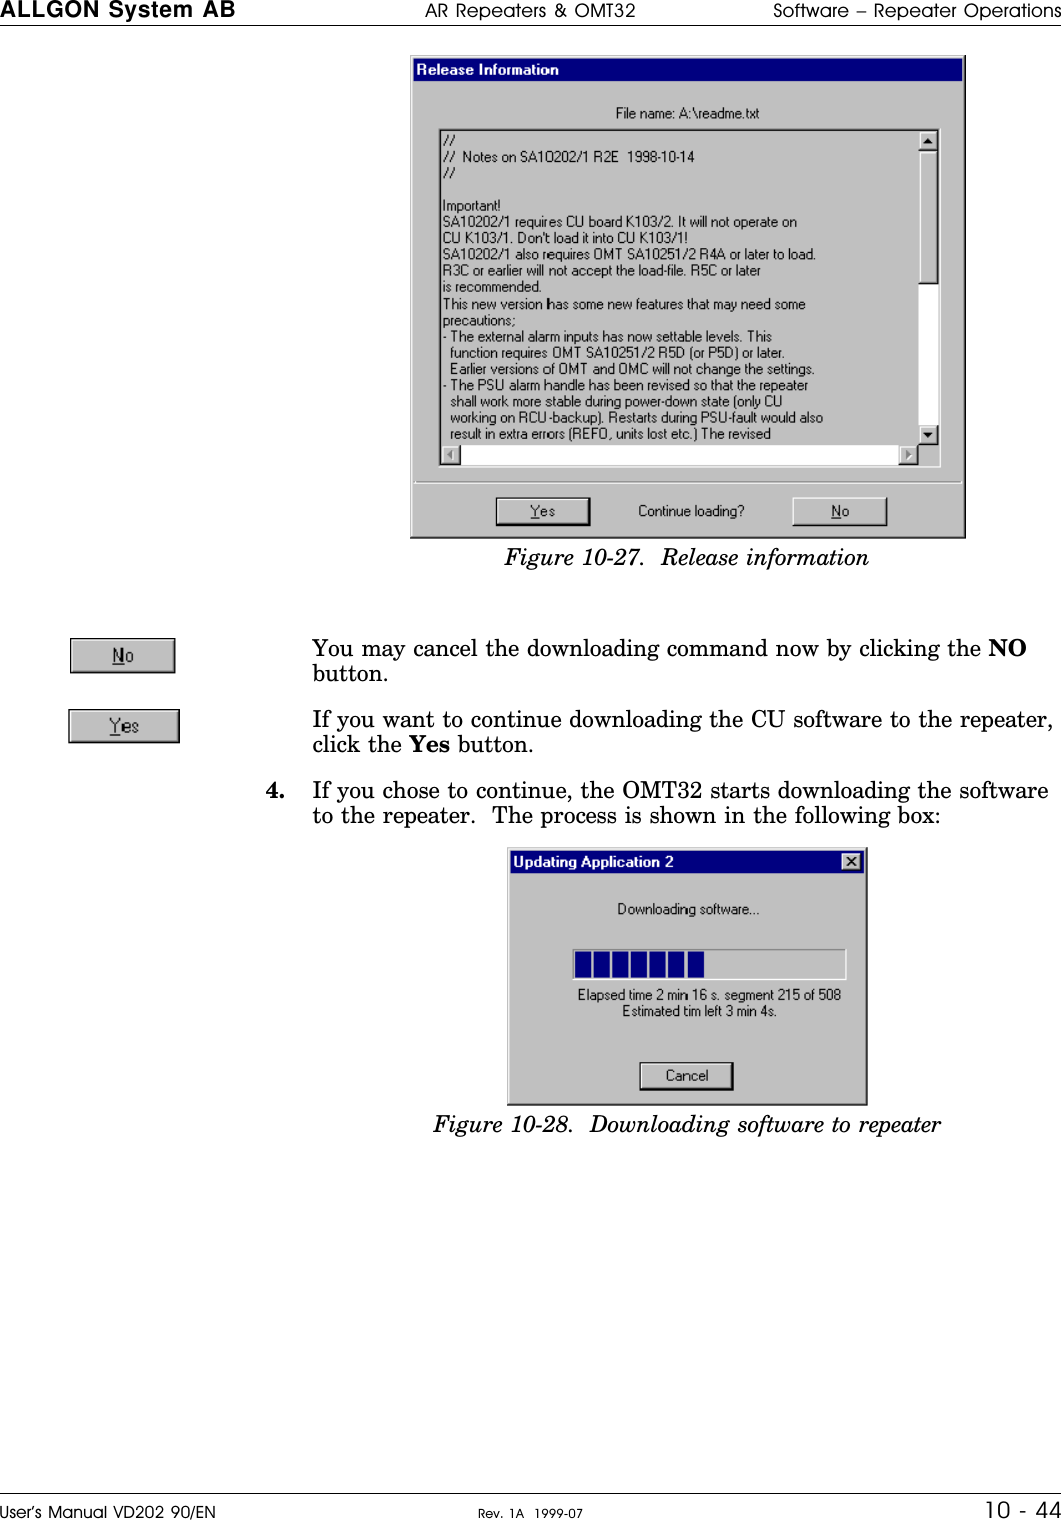 You may cancel the downloading command now by clicking the NObutton.If you want to continue downloading the CU software to the repeater,click the Yes button.4. If you chose to continue, the OMT32 starts downloading the softwareto the repeater.  The process is shown in the following box:Figure 10-27.  Release informationFigure 10-28.  Downloading software to repeaterALLGON System AB AR Repeaters &amp; OMT32 Software – Repeater OperationsUser’s Manual VD202 90/EN Rev. 1A  1999-07 10 - 44